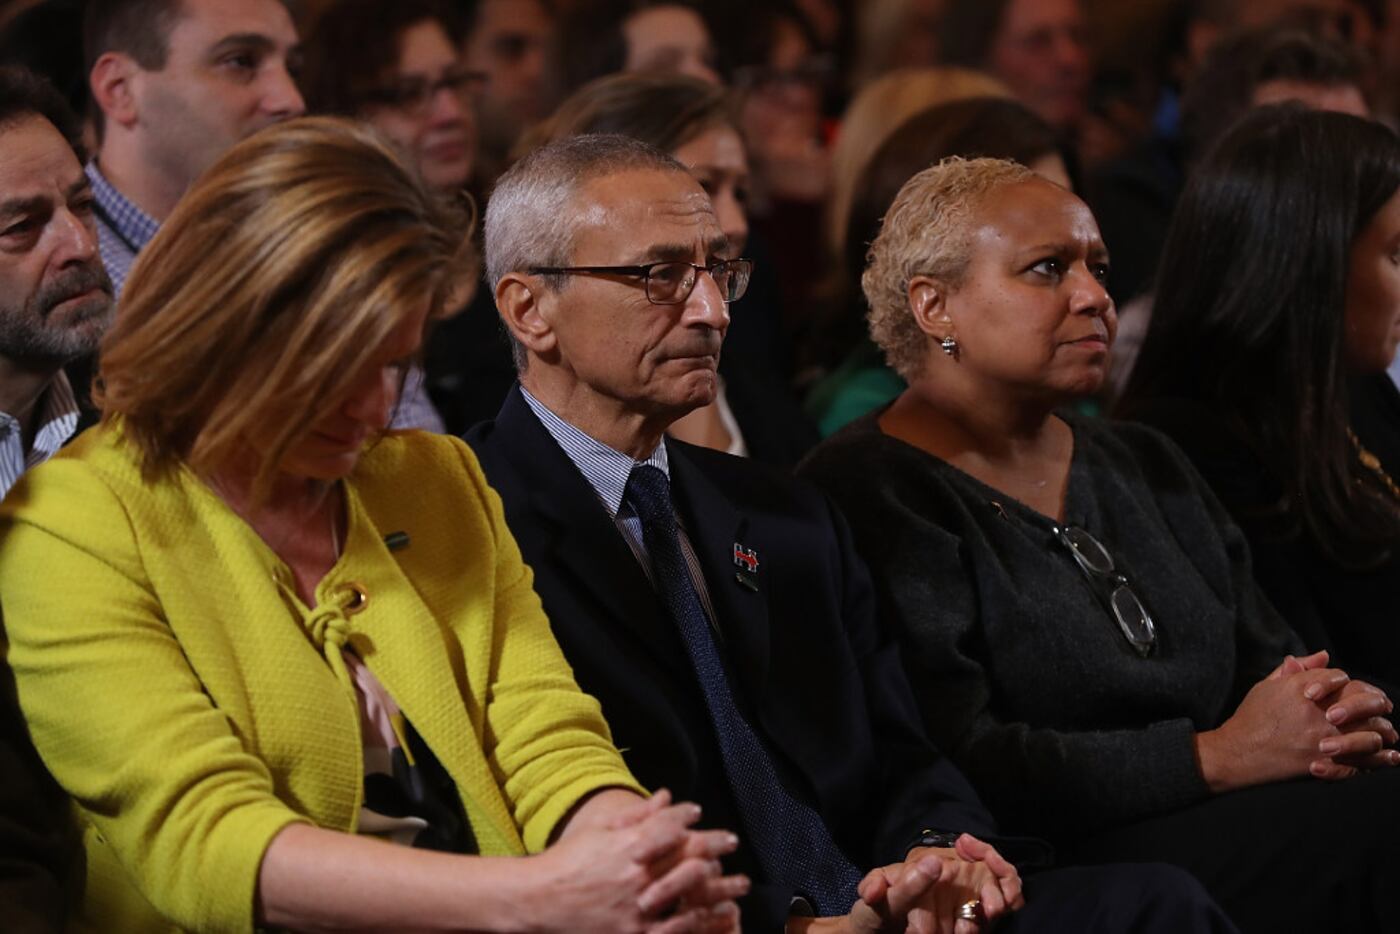 John Podesta, Hillary Clinton's campaign chairman, looks on as publicly conceded defeat.